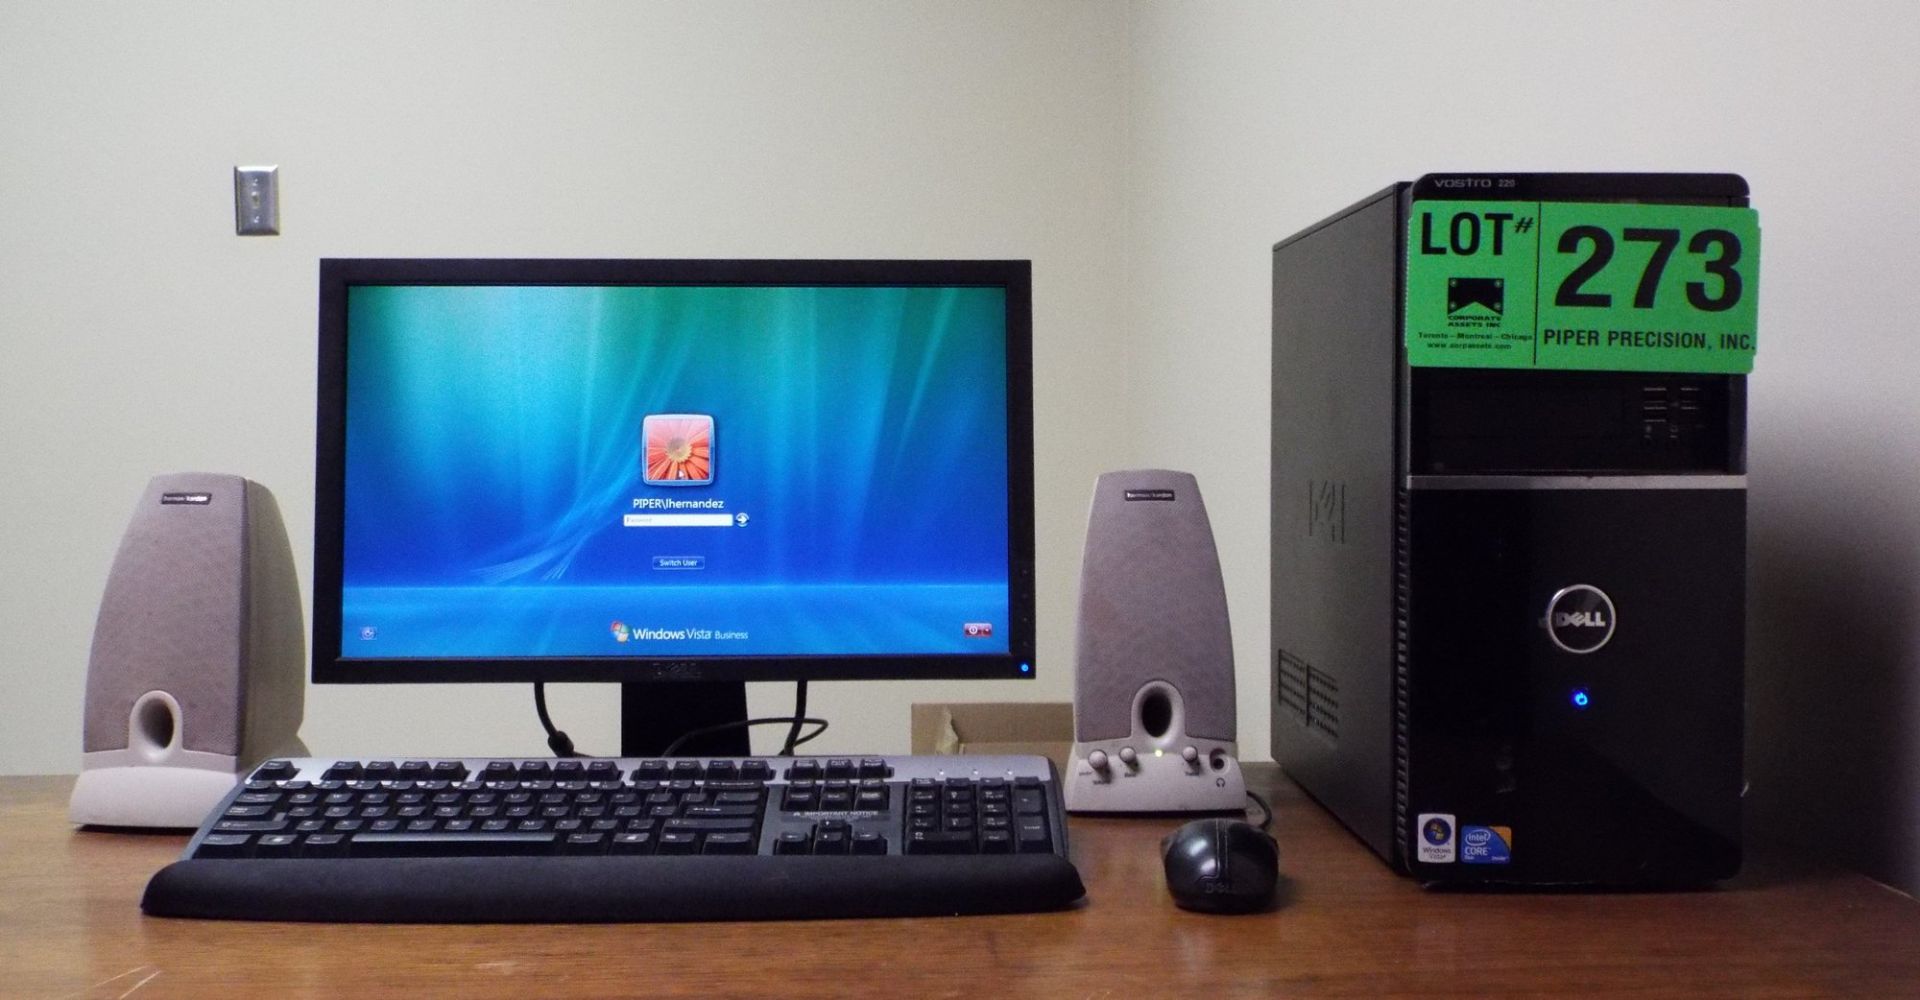 LOT/ DELL DESKTOP PC WITH FLATSCREEN MONITOR, KEYBOARD, MOUSE AND SPEAKERS